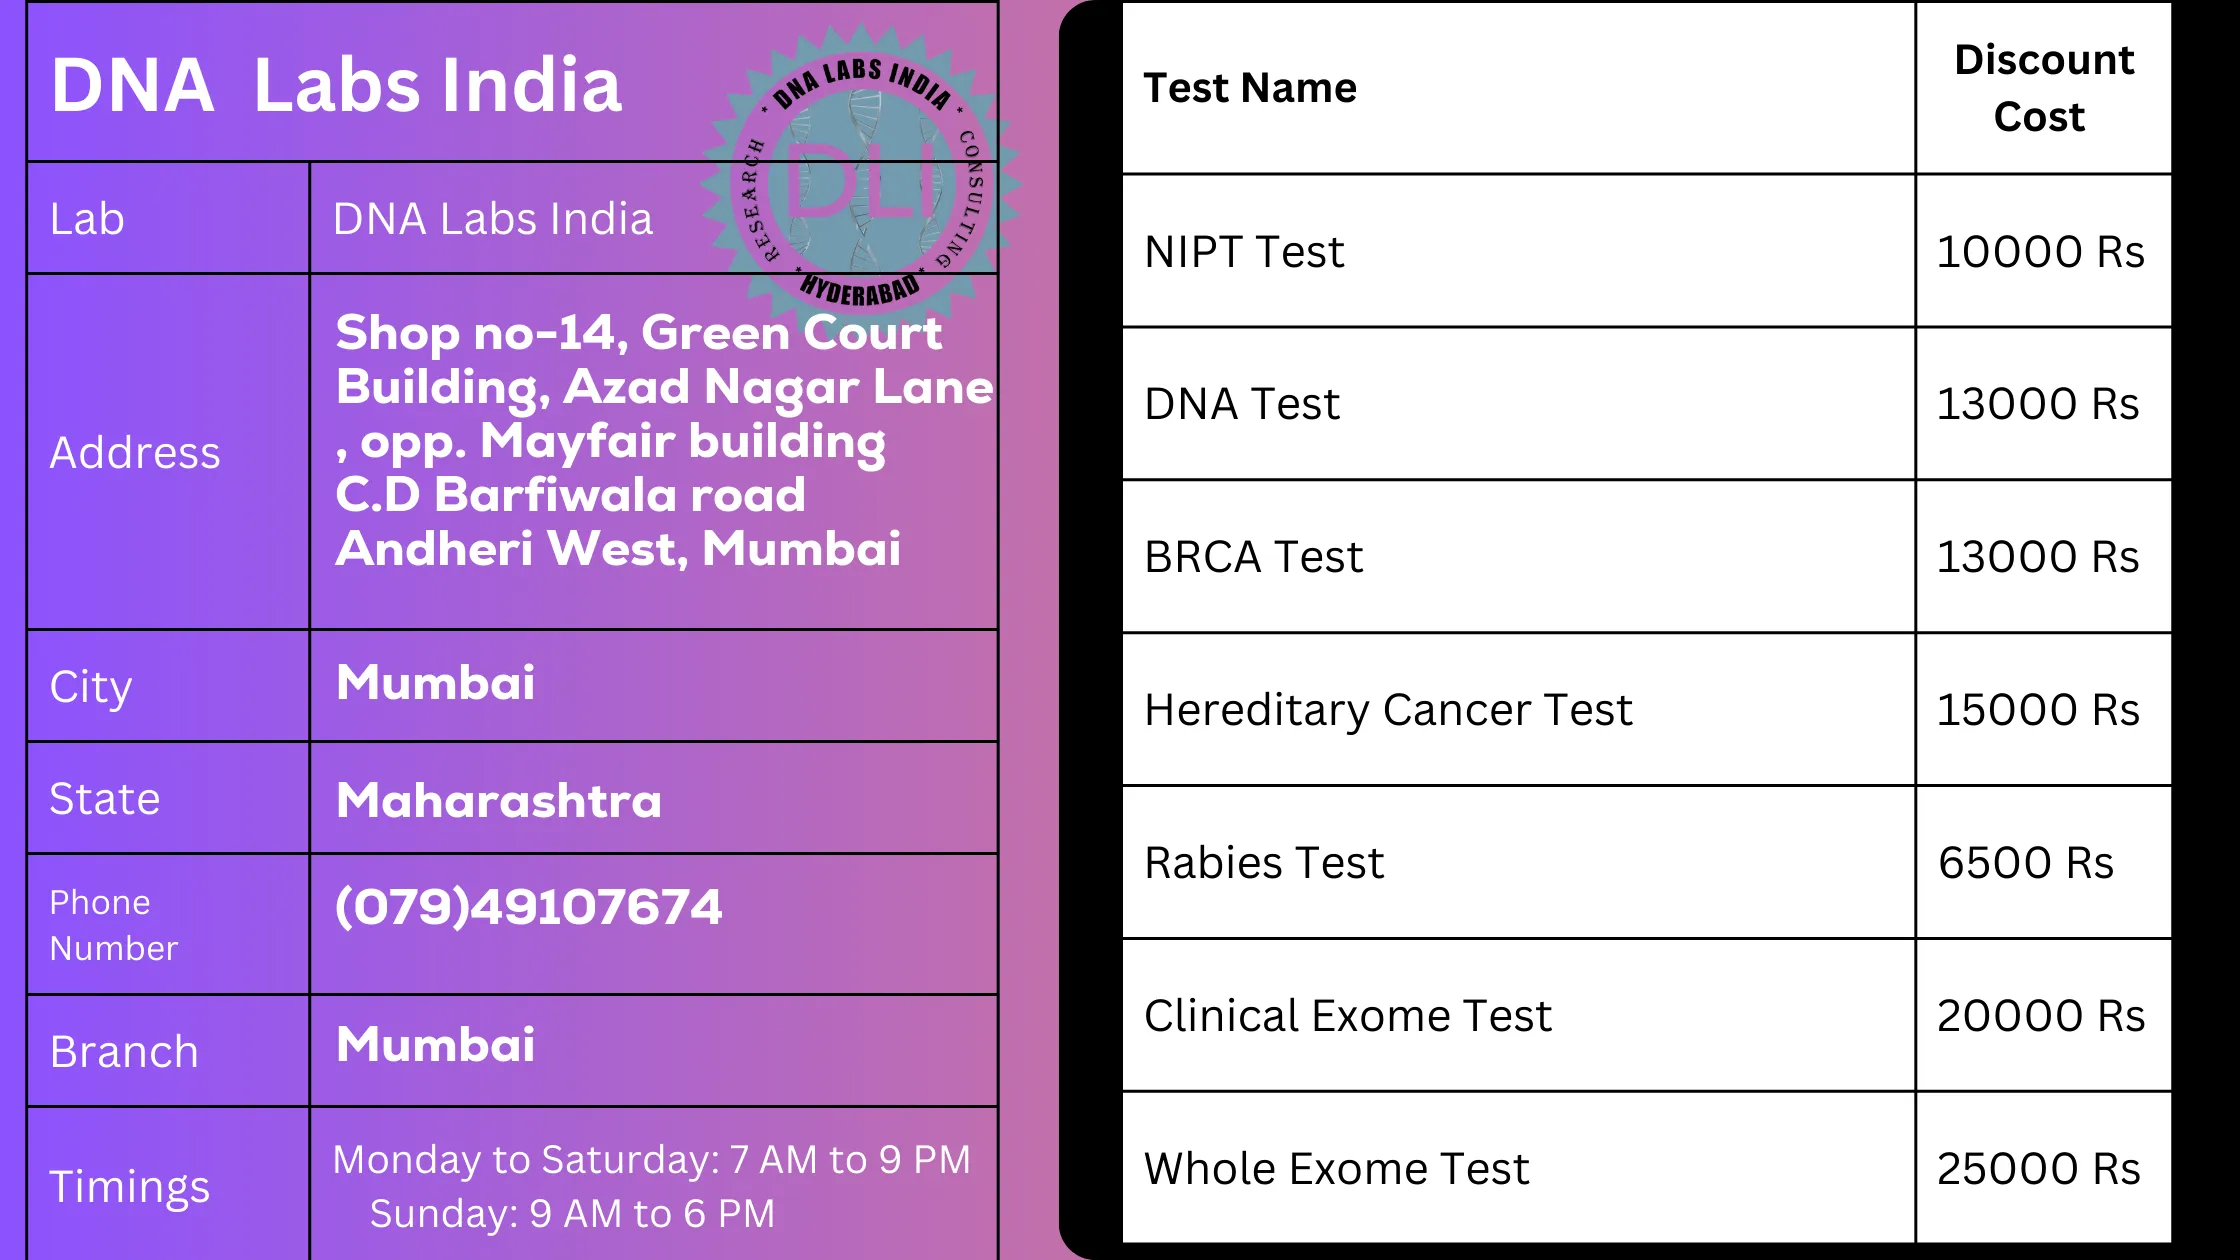 DNA Labs India: Your Trusted DNA Testing Partner in Mumbai